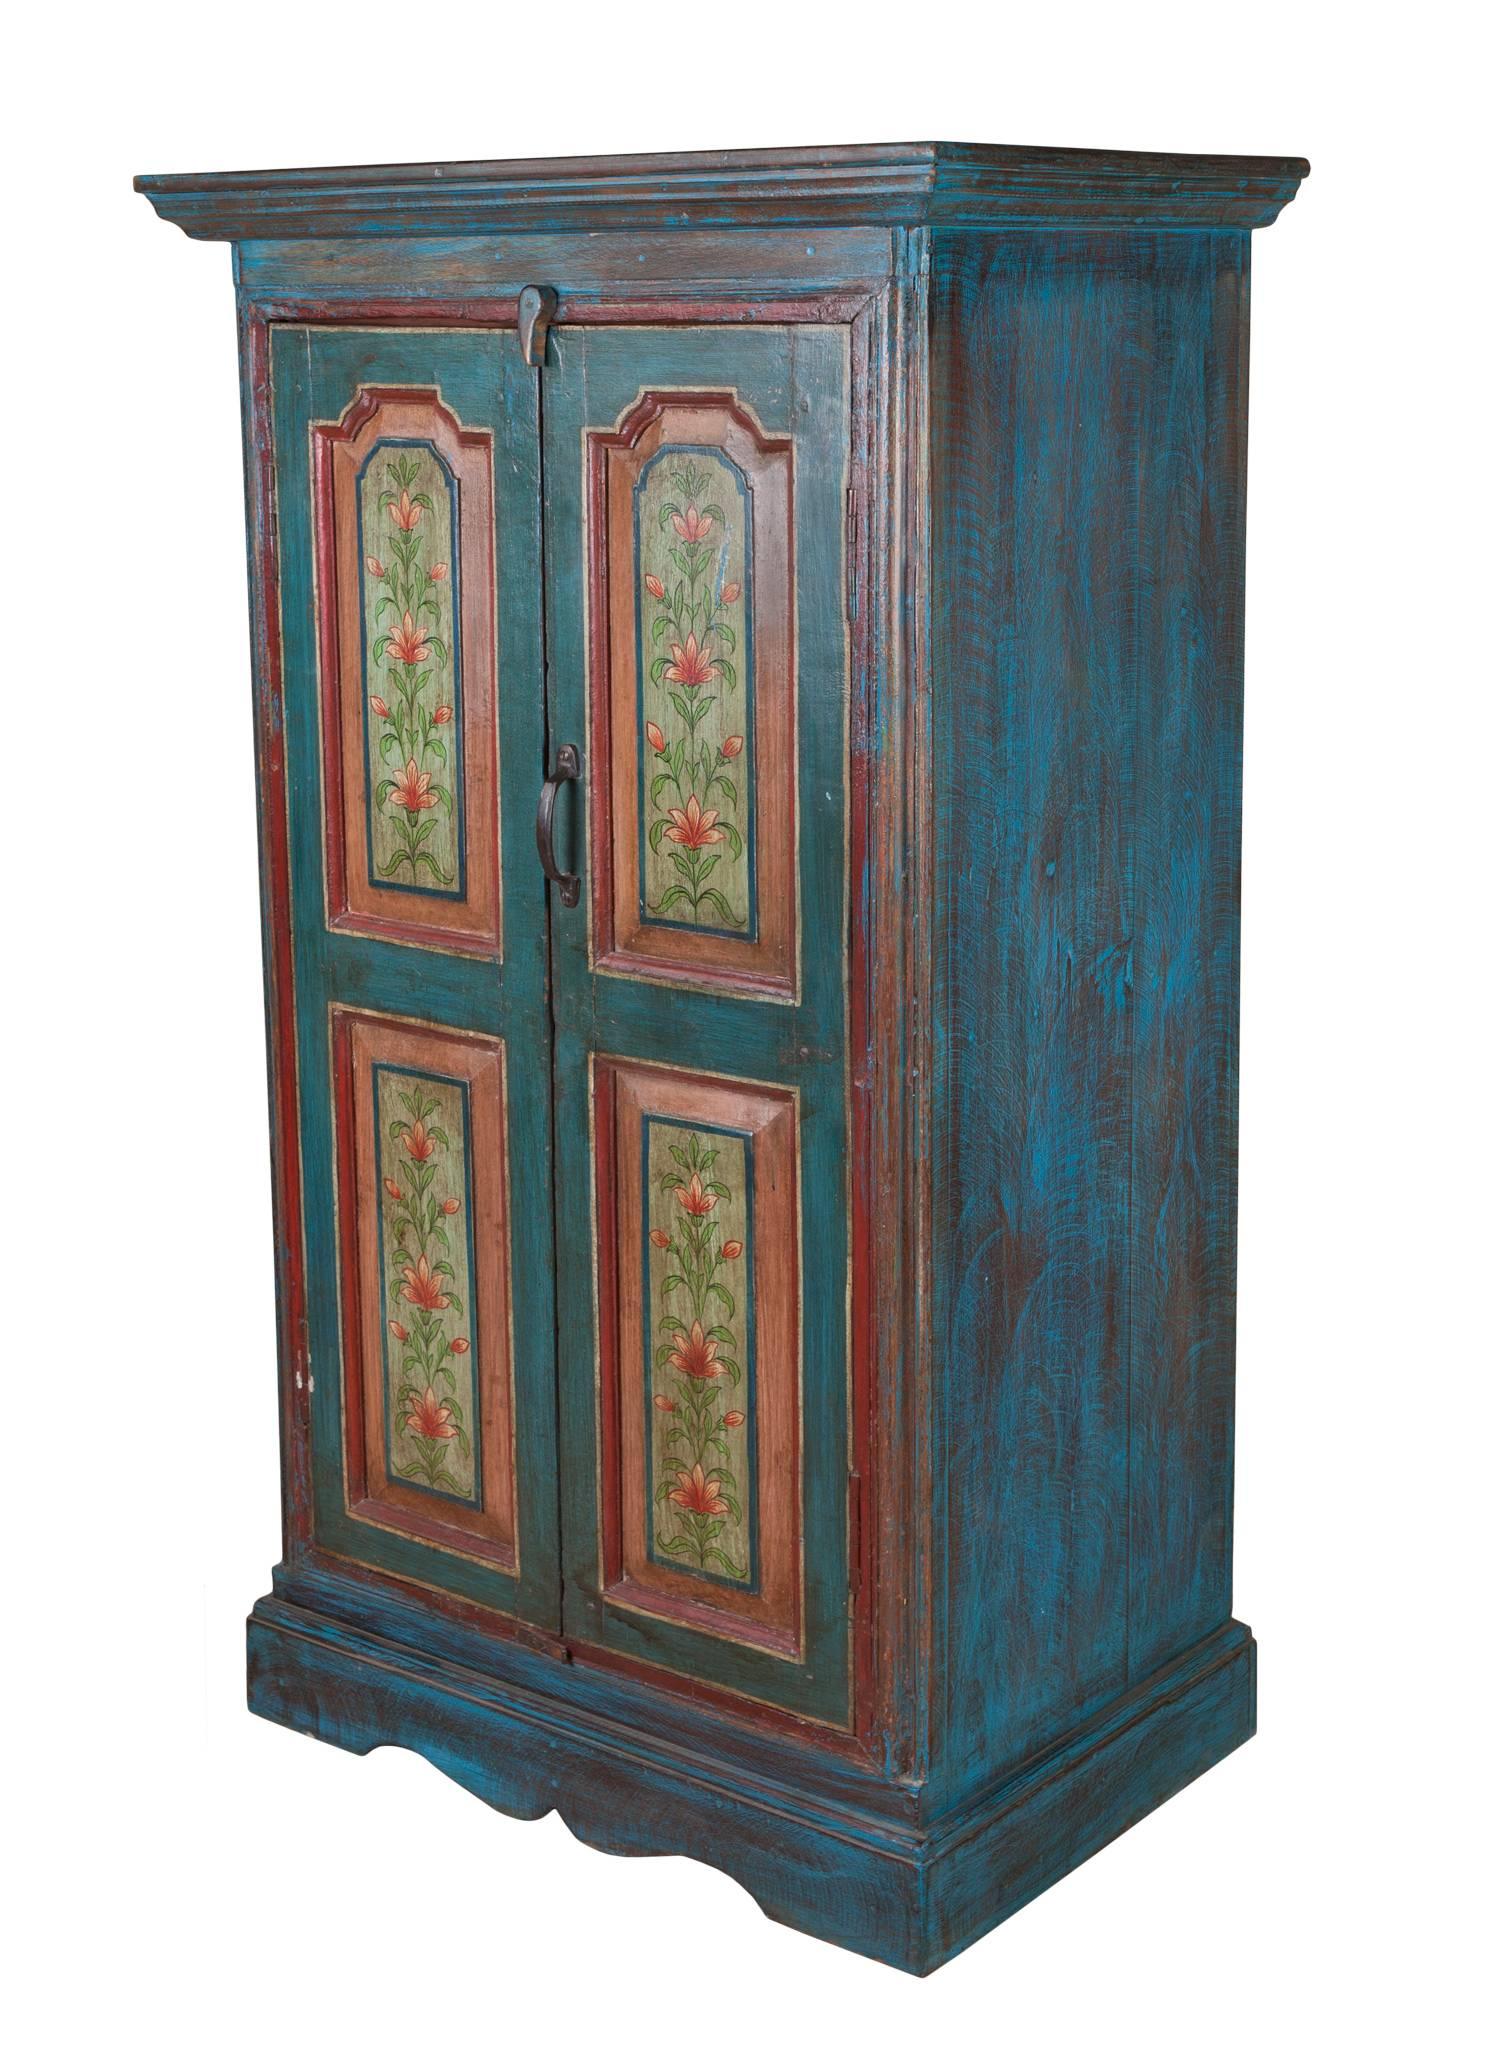 Beautiful, hand-painted window shutters from the early 1900s, converted to a cabinet using reclaimed wood from architectural sites. The wood is teak and the paint away from the original shutters has been made to match them. The body without the